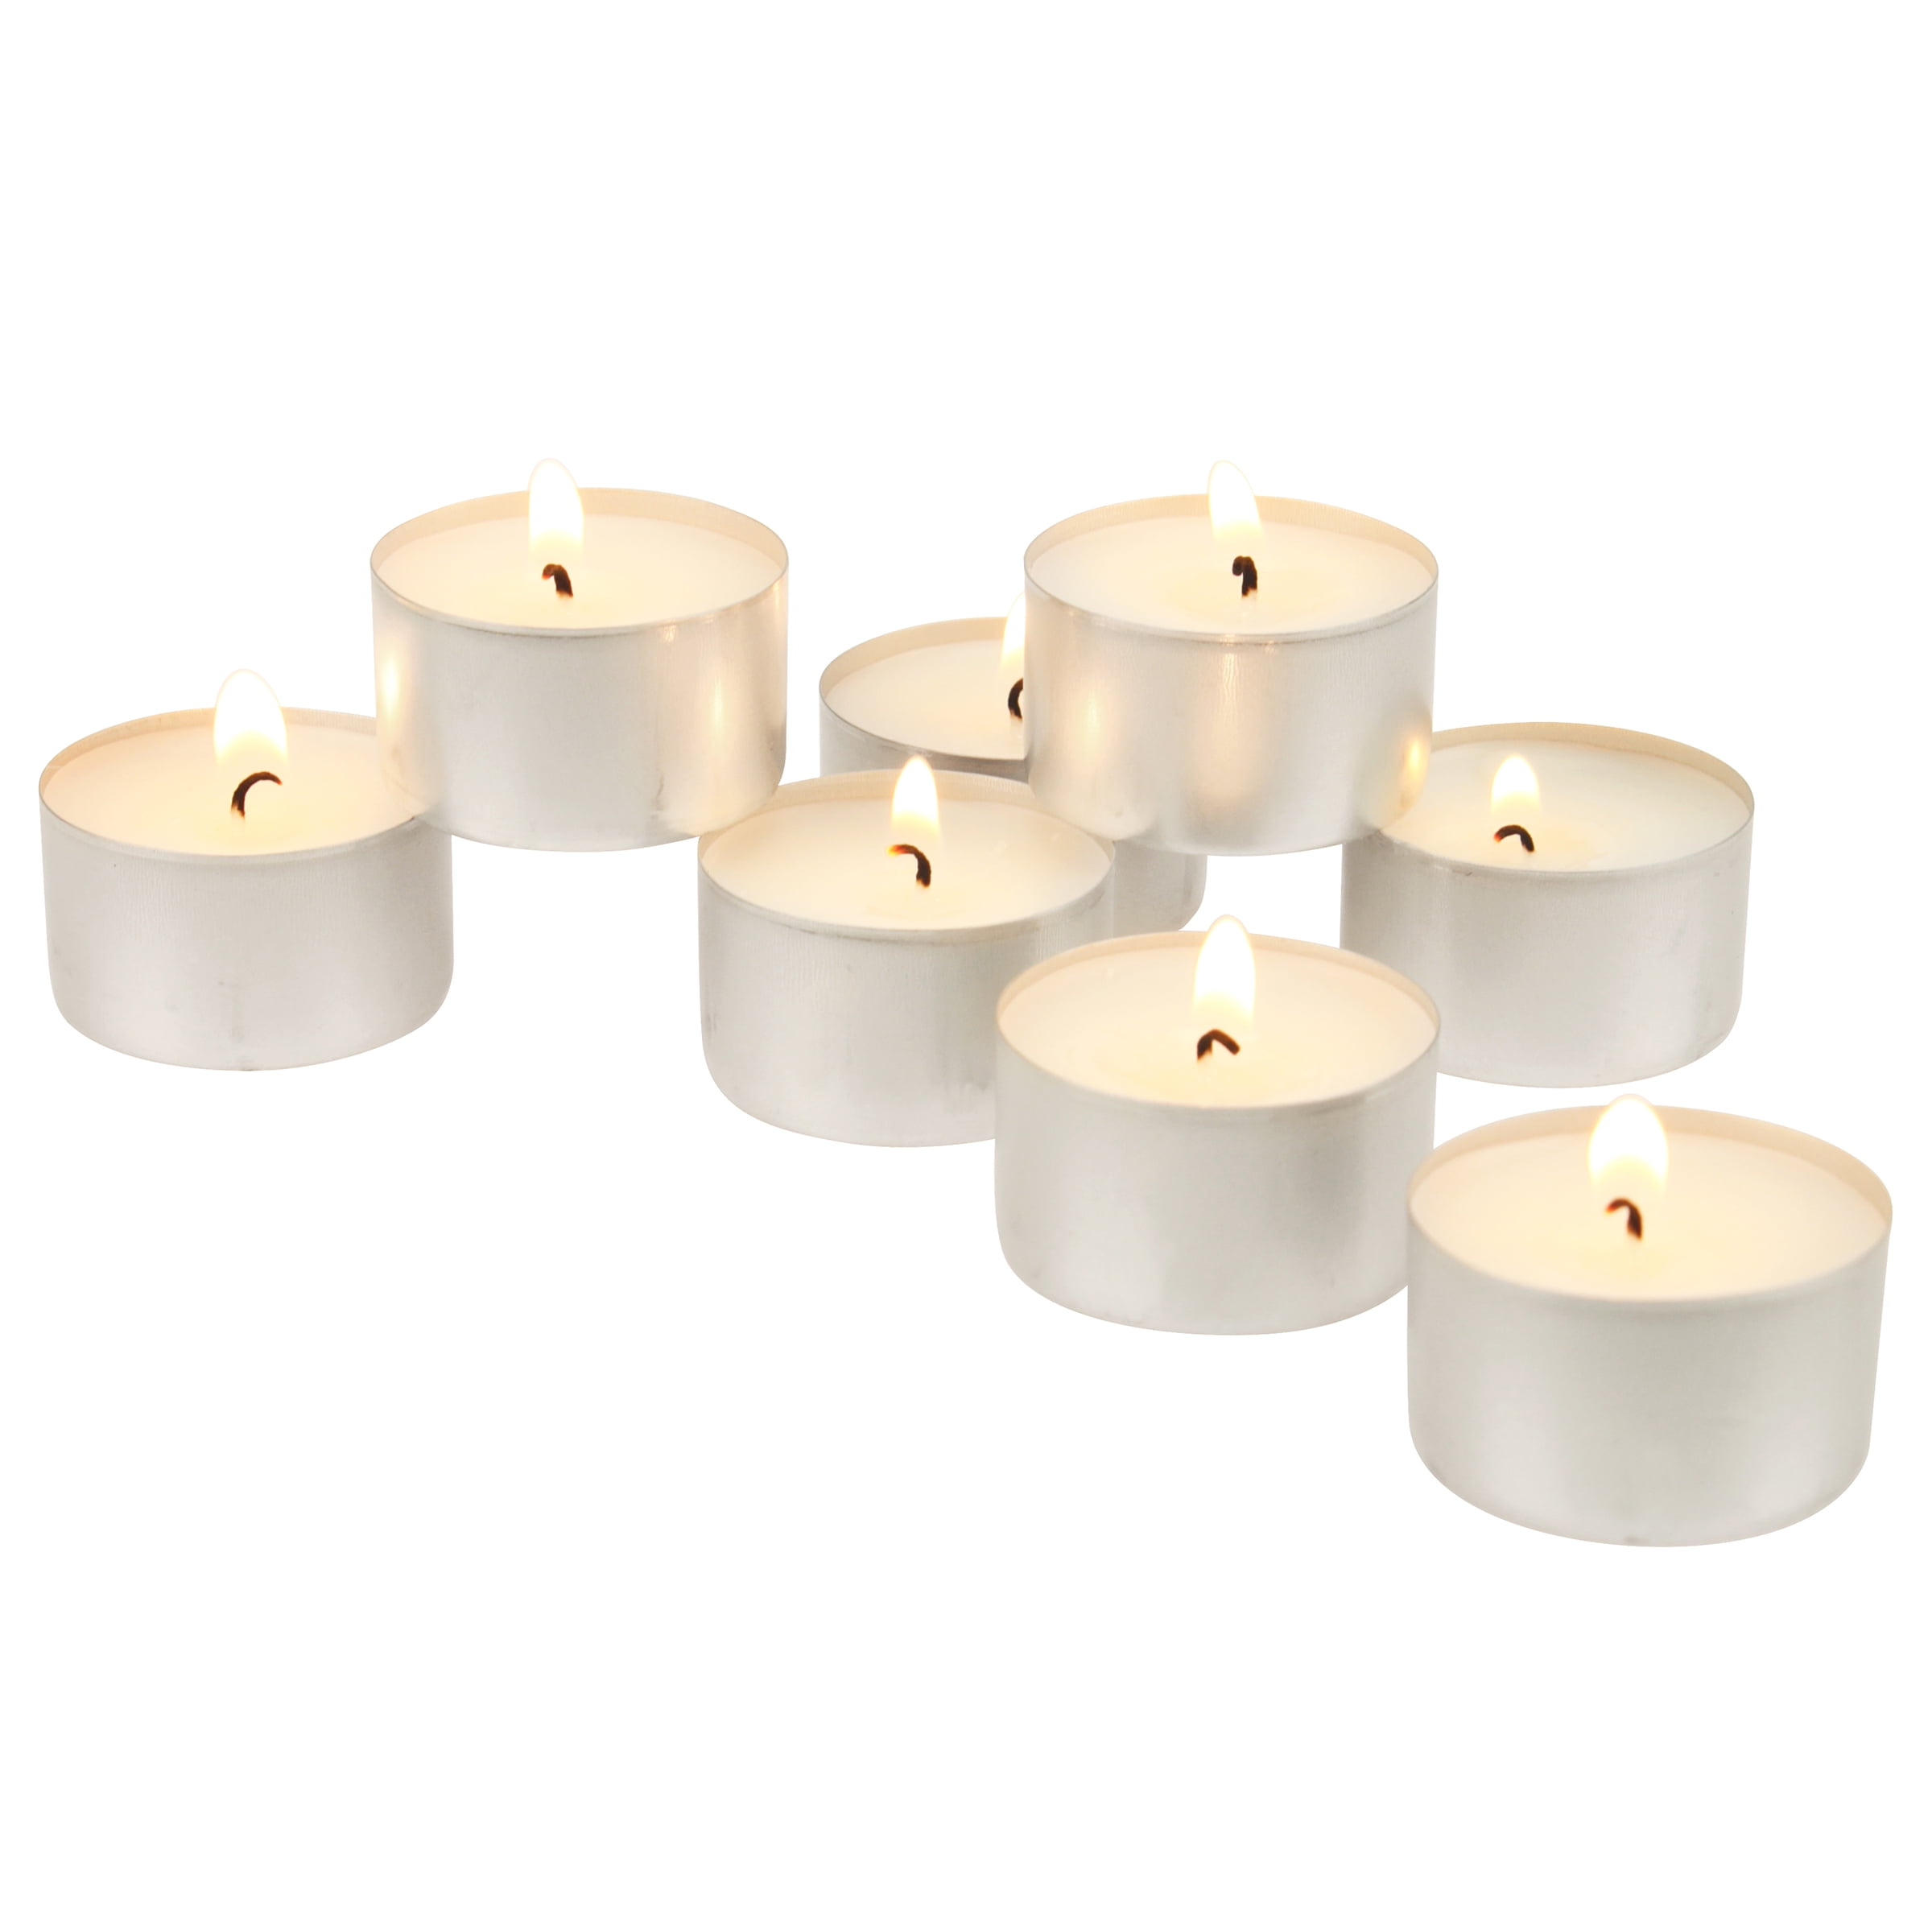 Bulk 96 Pack 6 to 7 Hour Extended Burn Time White Stonebriar Unscented Long Burning Clear Cup Tea Light Candles